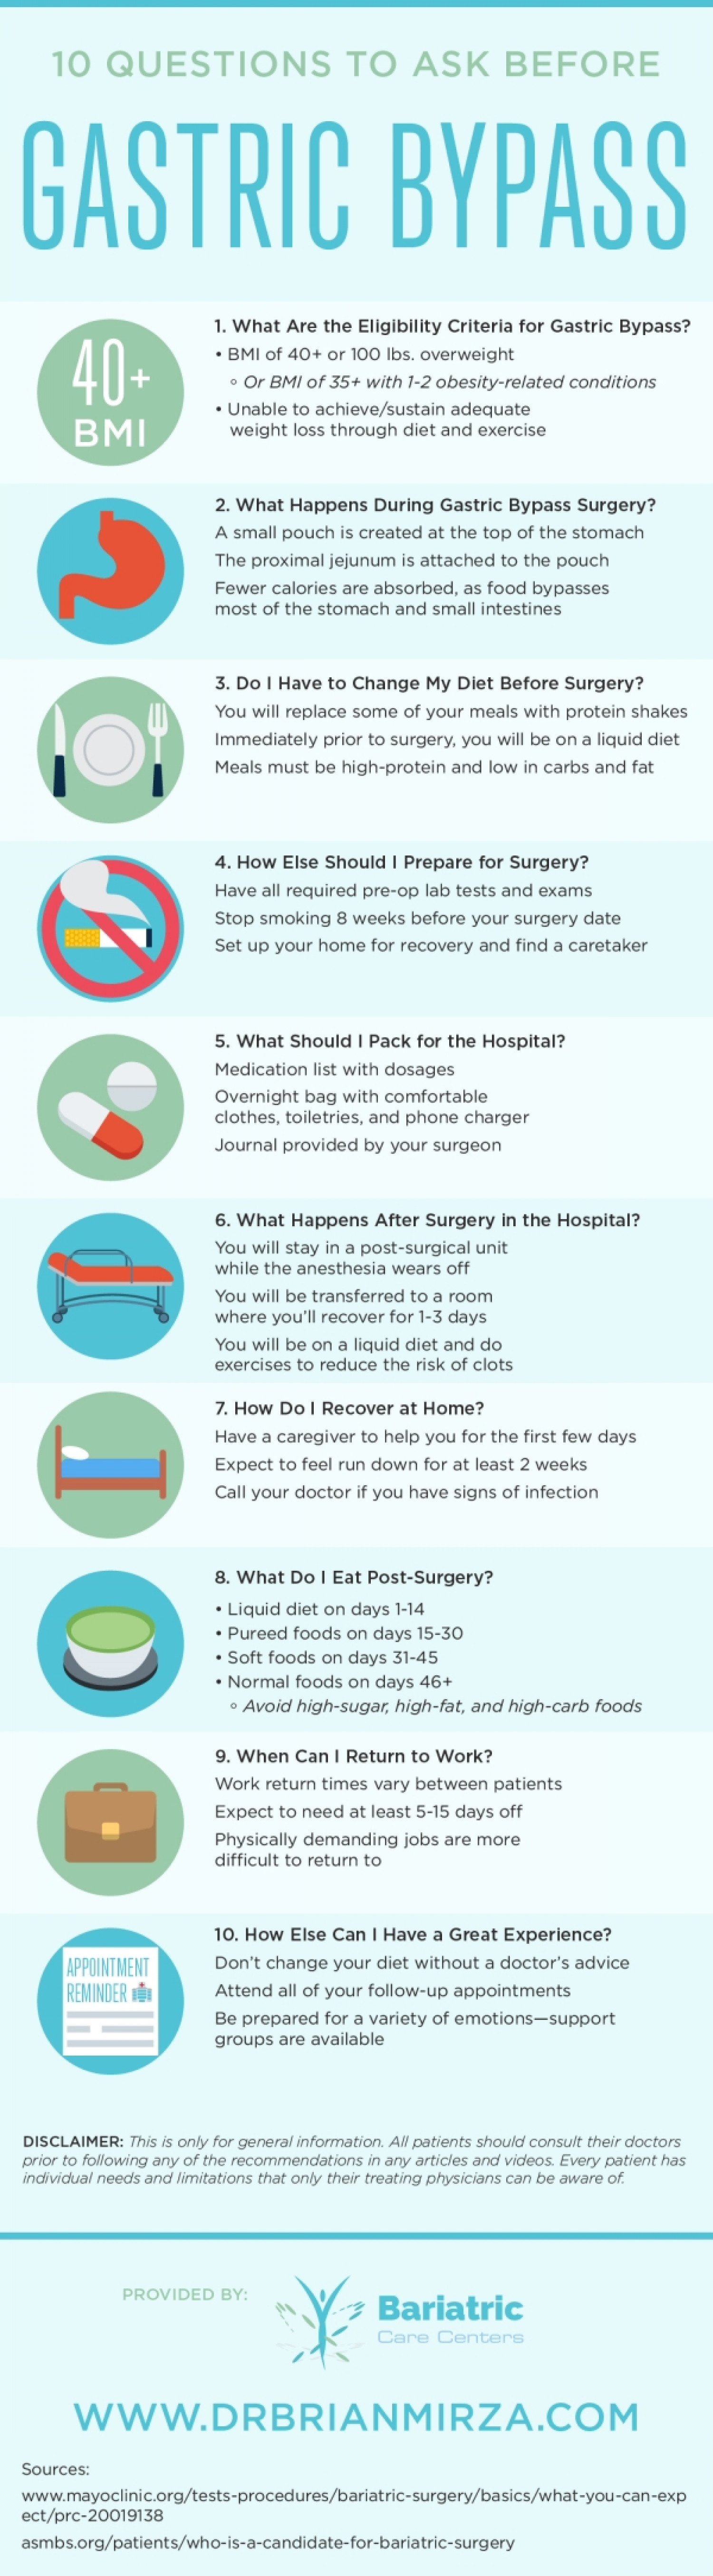 10 Questions to Ask Before Gastric Bypass Infographic